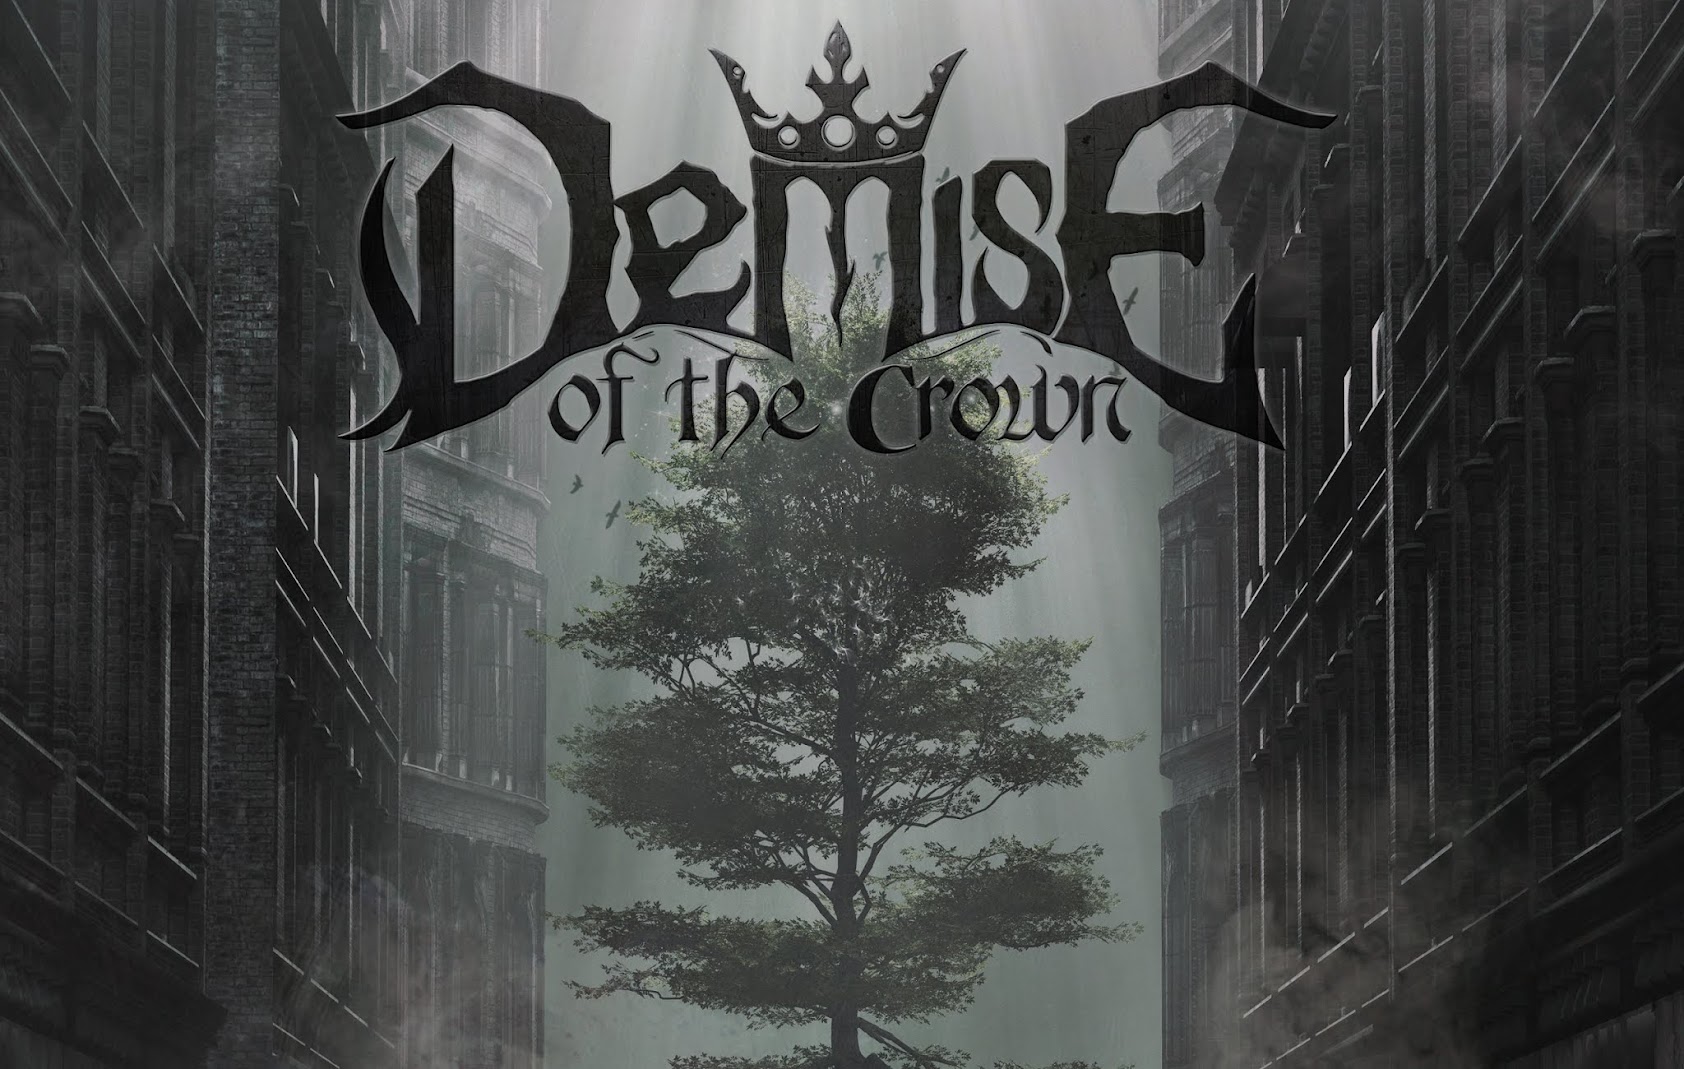 Dying for the Crown. Wildness 2020 Ultimate Demise. Demise of the Crown Metal Band. Demise of the Crown -Canadian Metal Band. Demise show